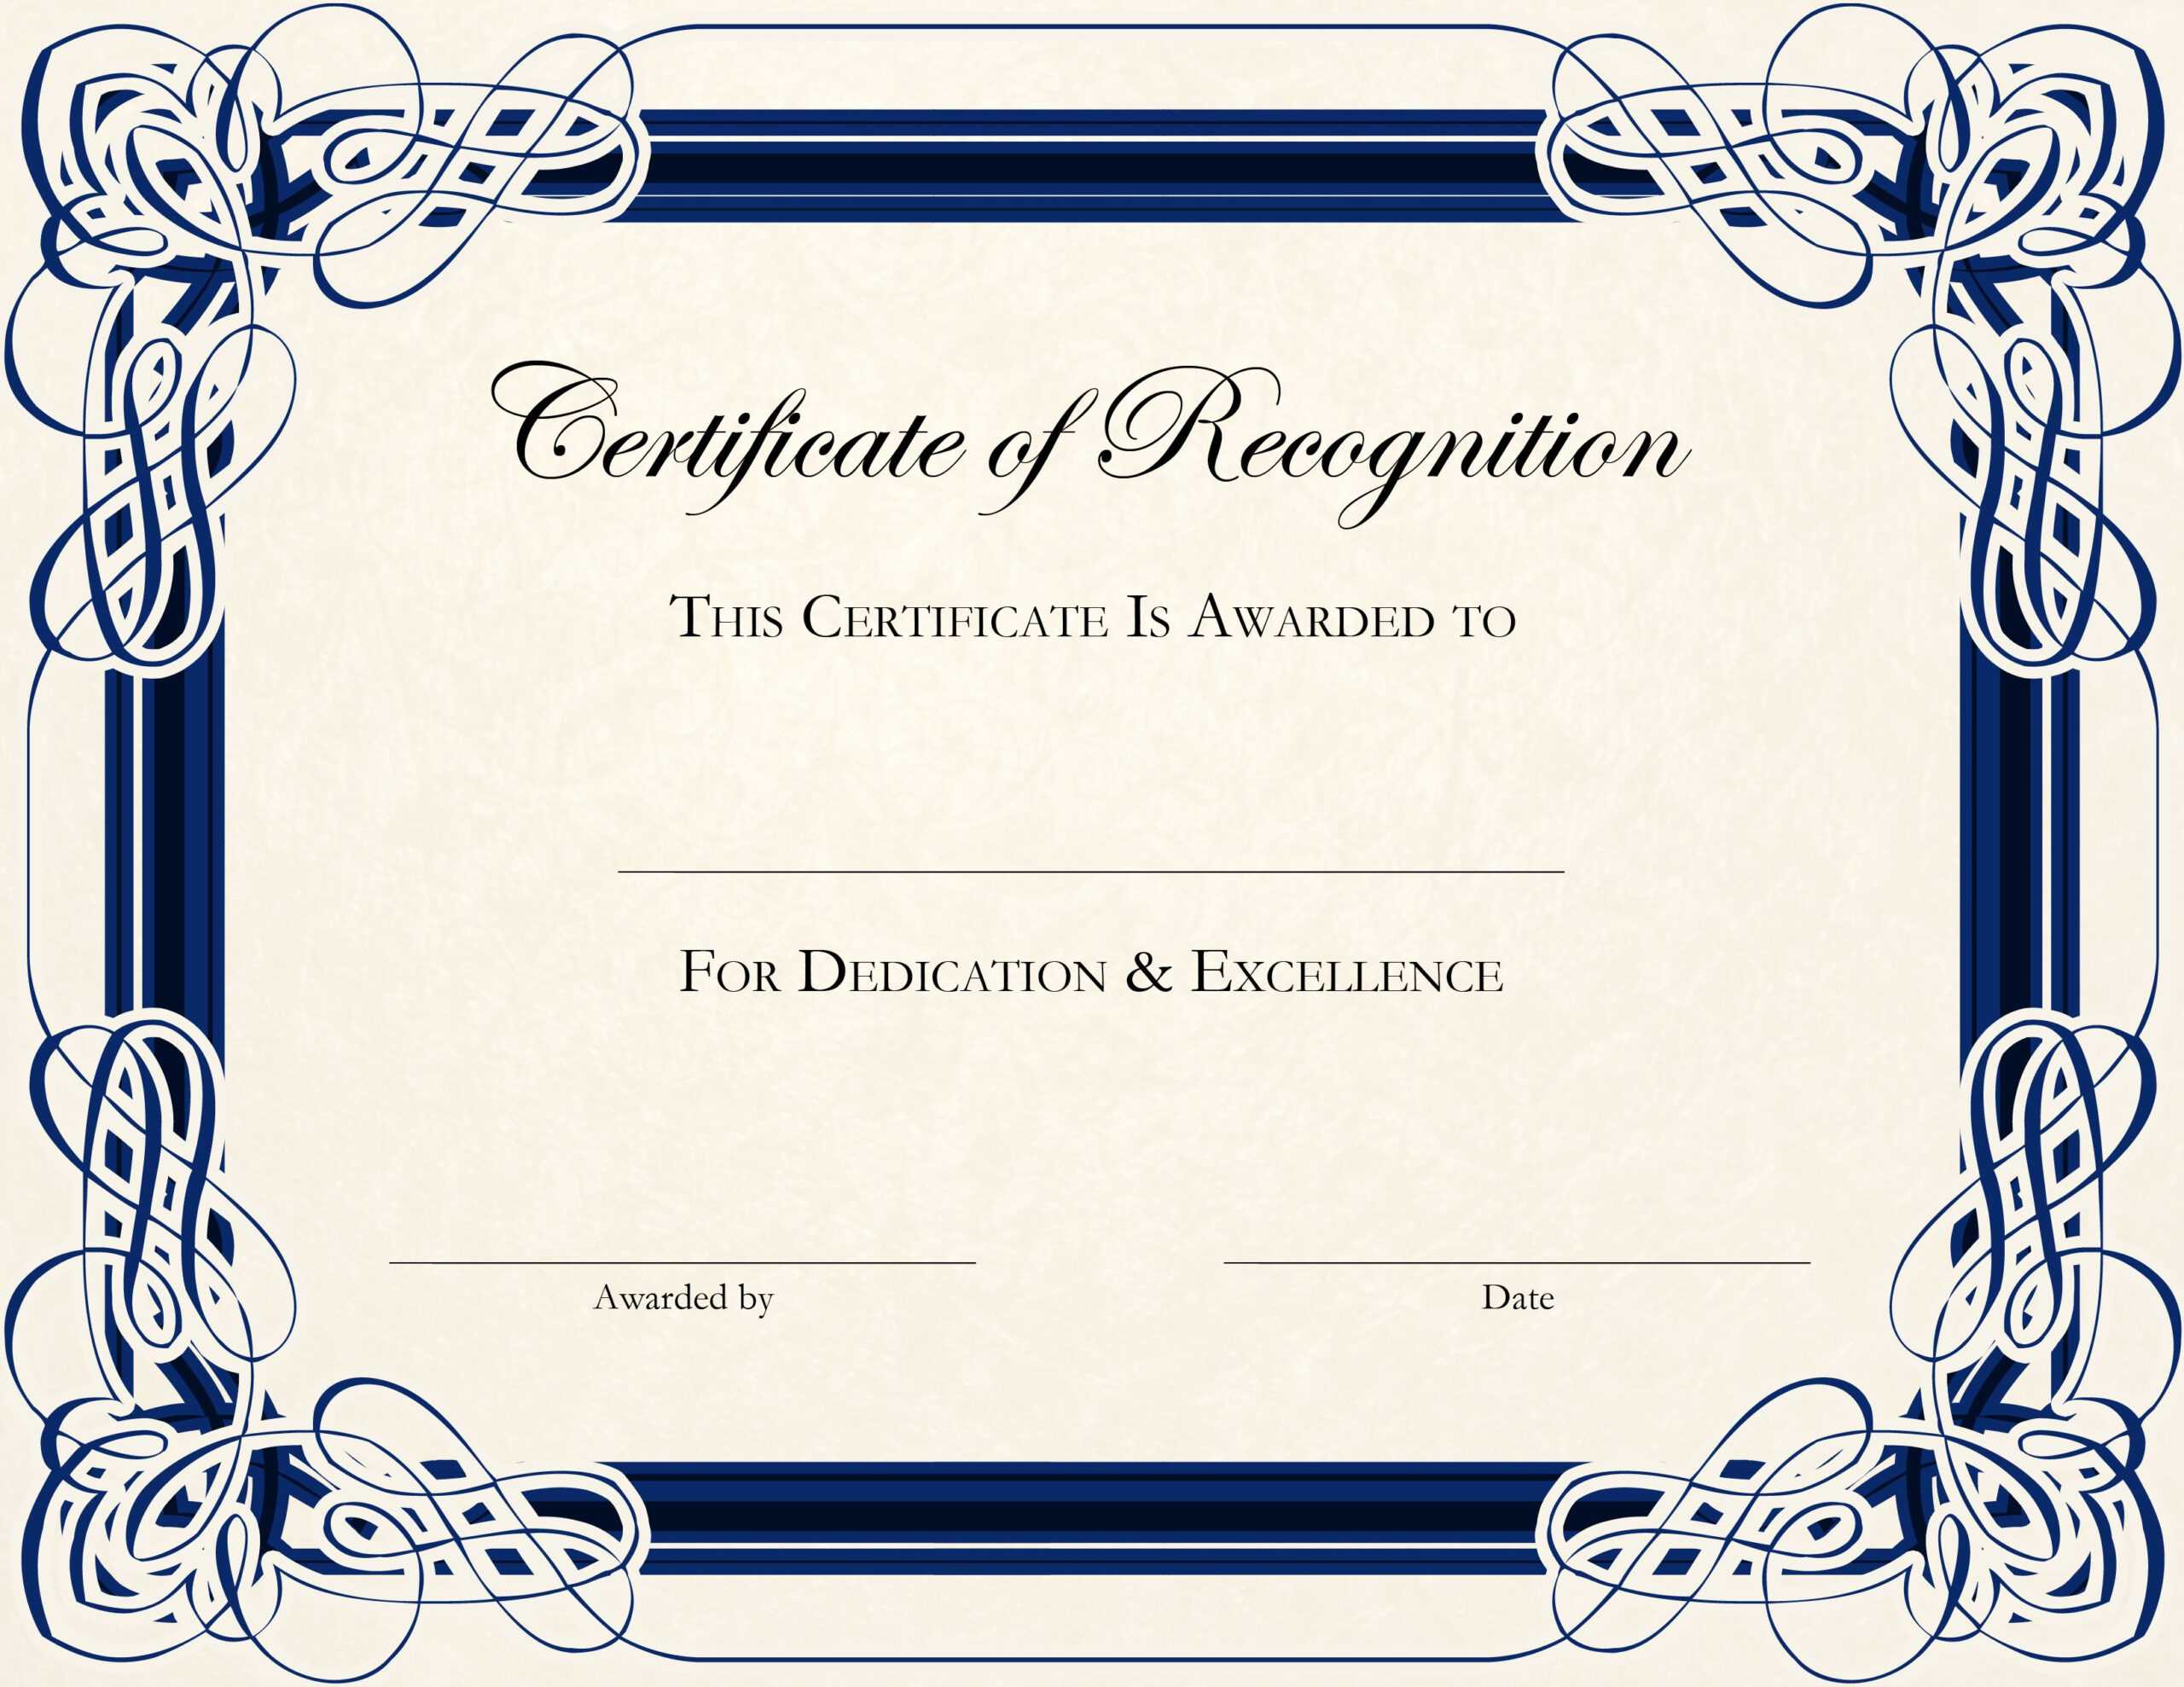 Certificate Template Designs Recognition Docs | Certificate Intended For Certificate Of Appreciation Template Free Printable